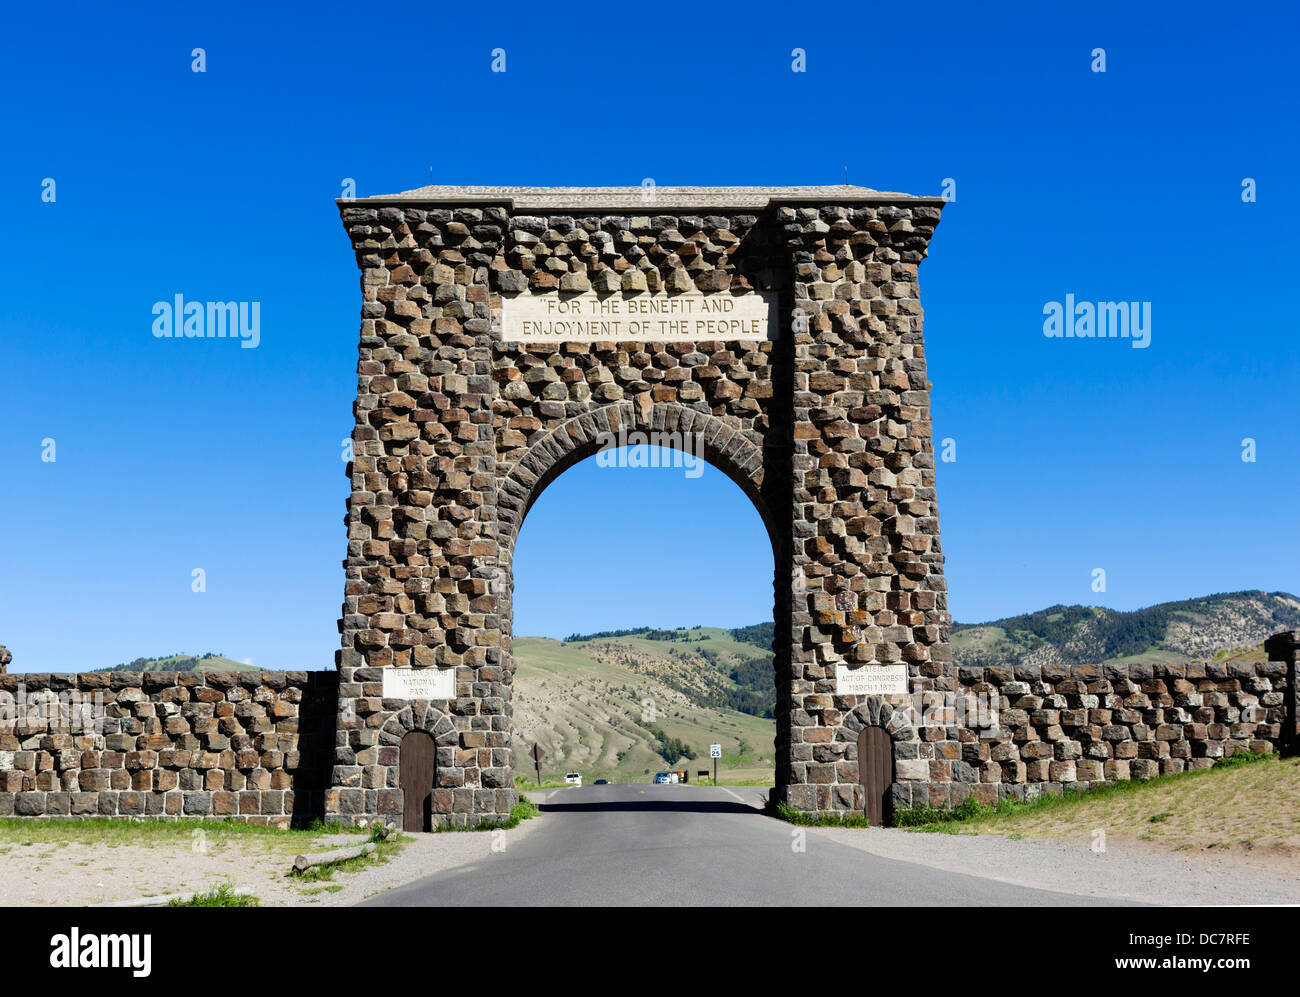 The Roosevelt Arch at the North Entrance to Yellowstone National Park, Wyoming, USA Stock Photo